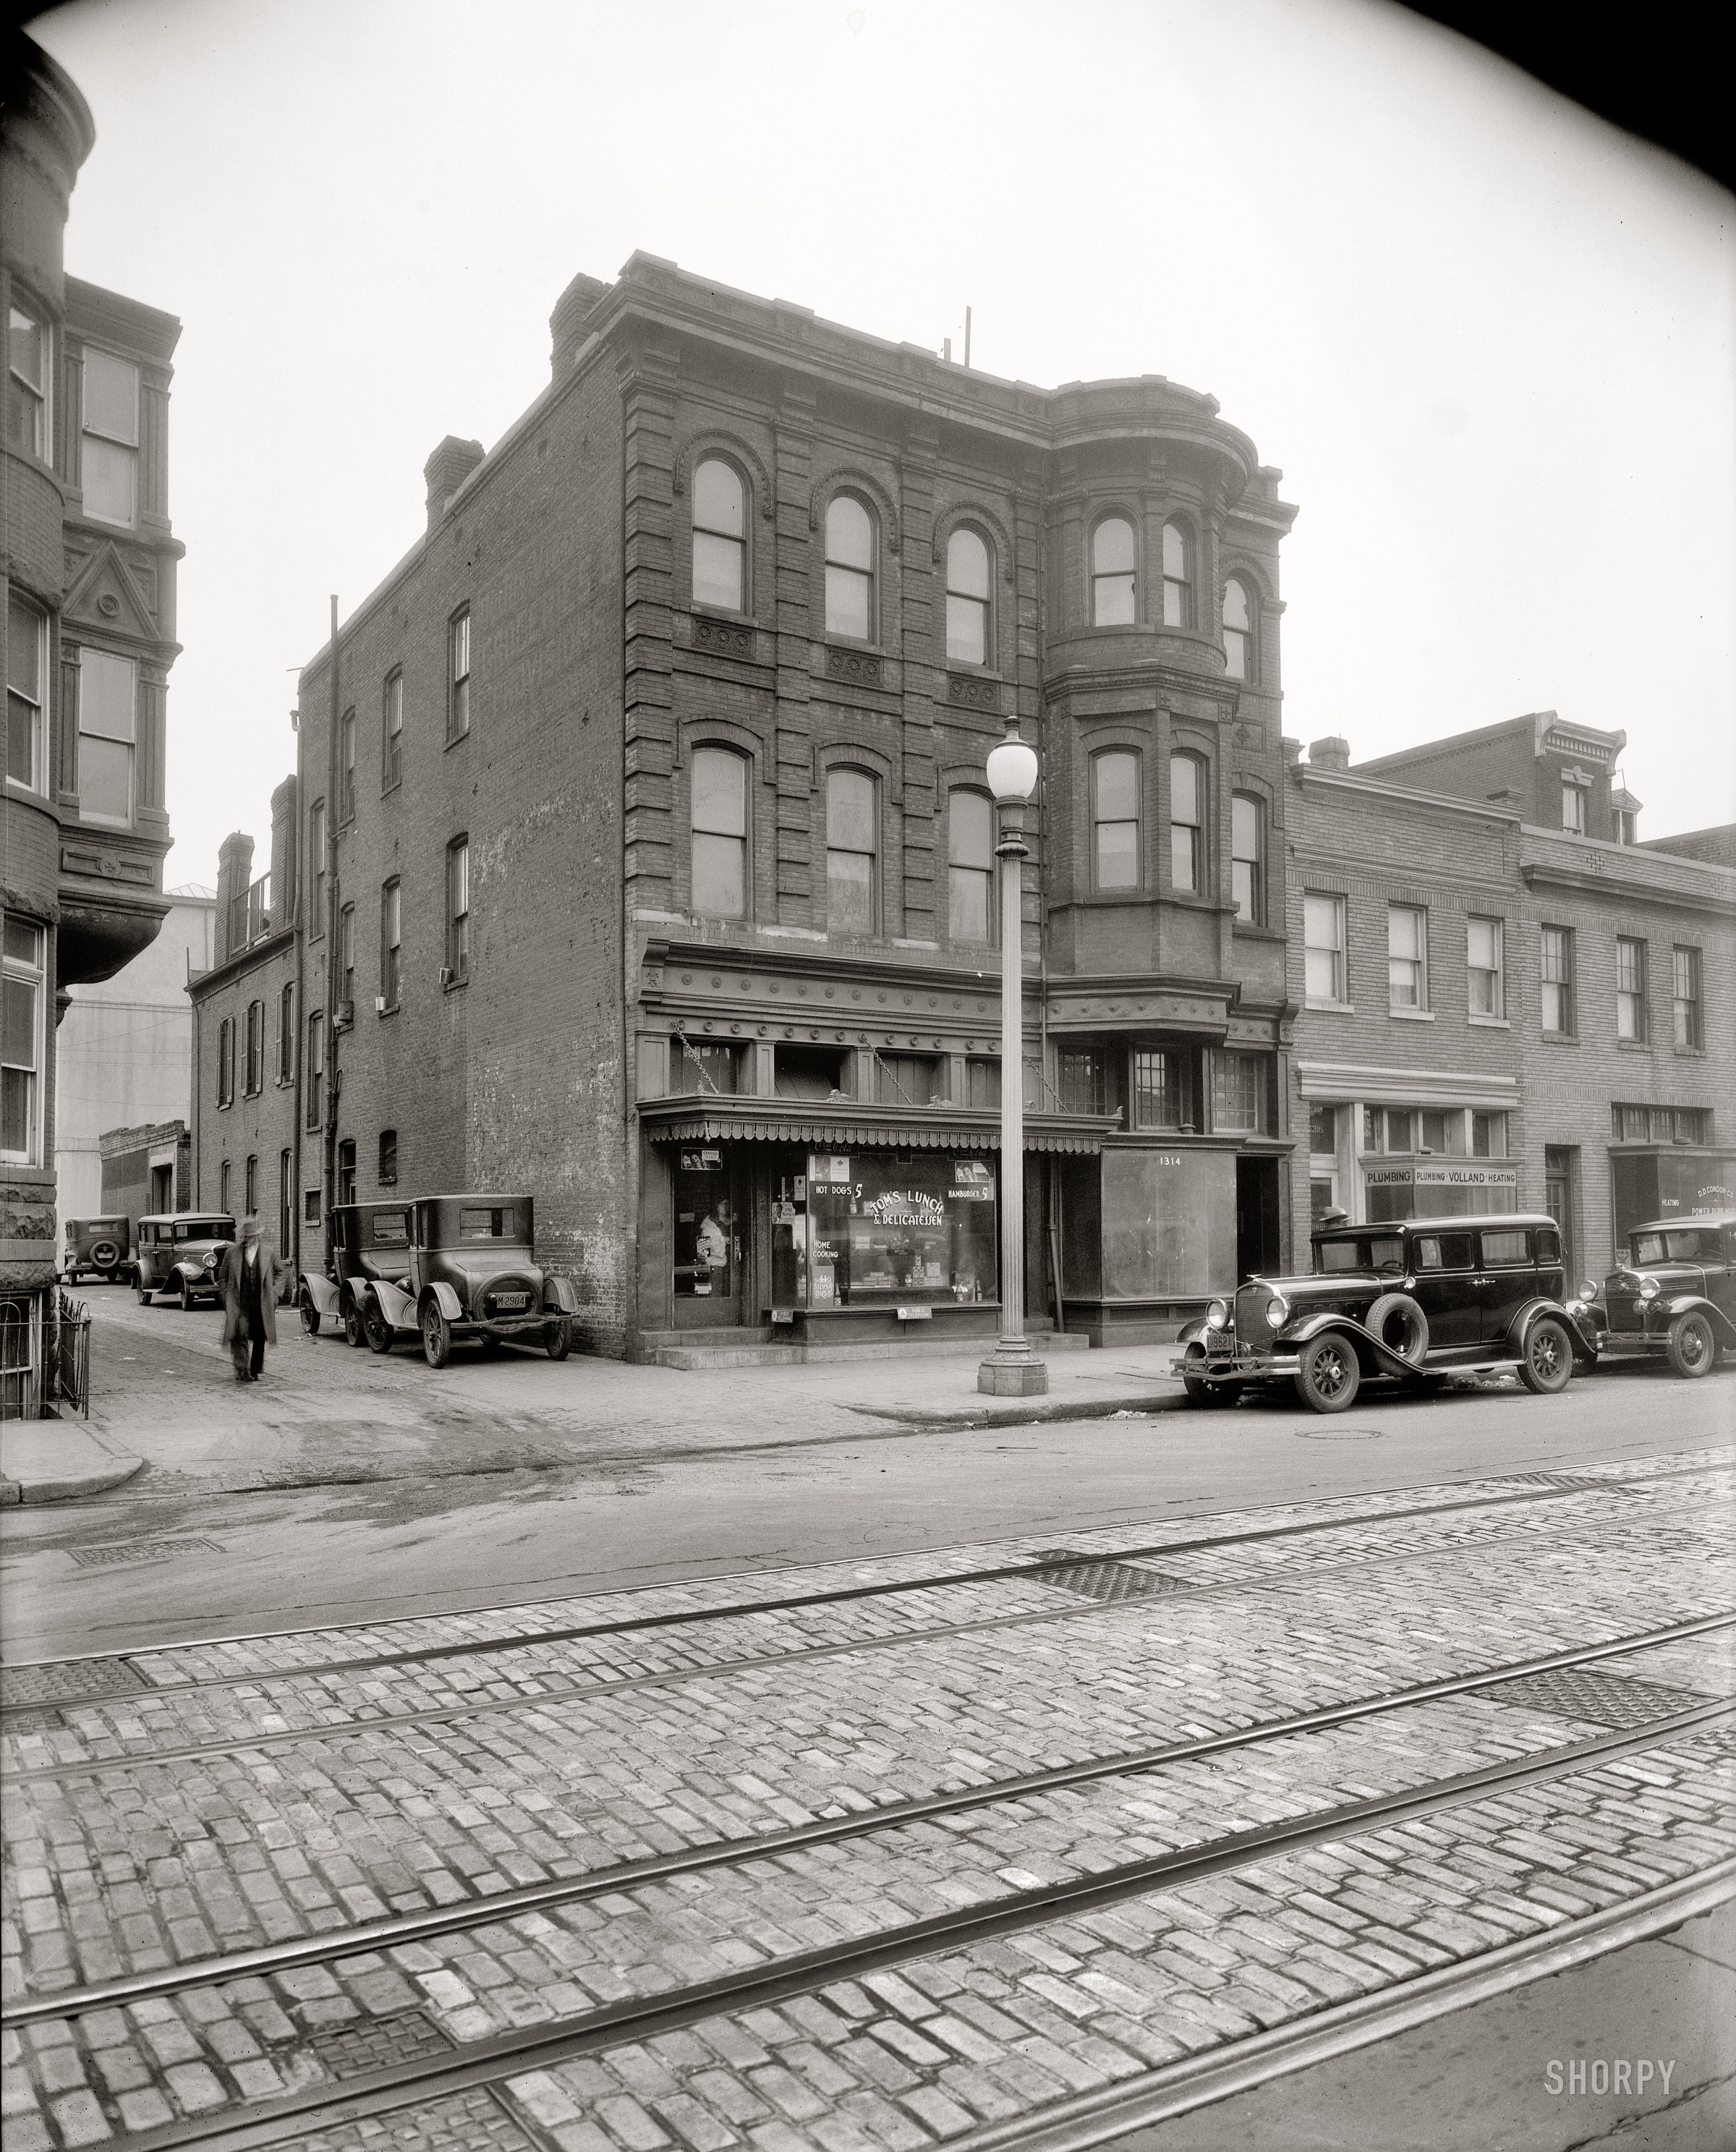 Washington, D.C., circa 1930. "Store front, 9th Street N.W." Hey lady, it's safe to come out. National Photo Company Collection safety negative. View full size.